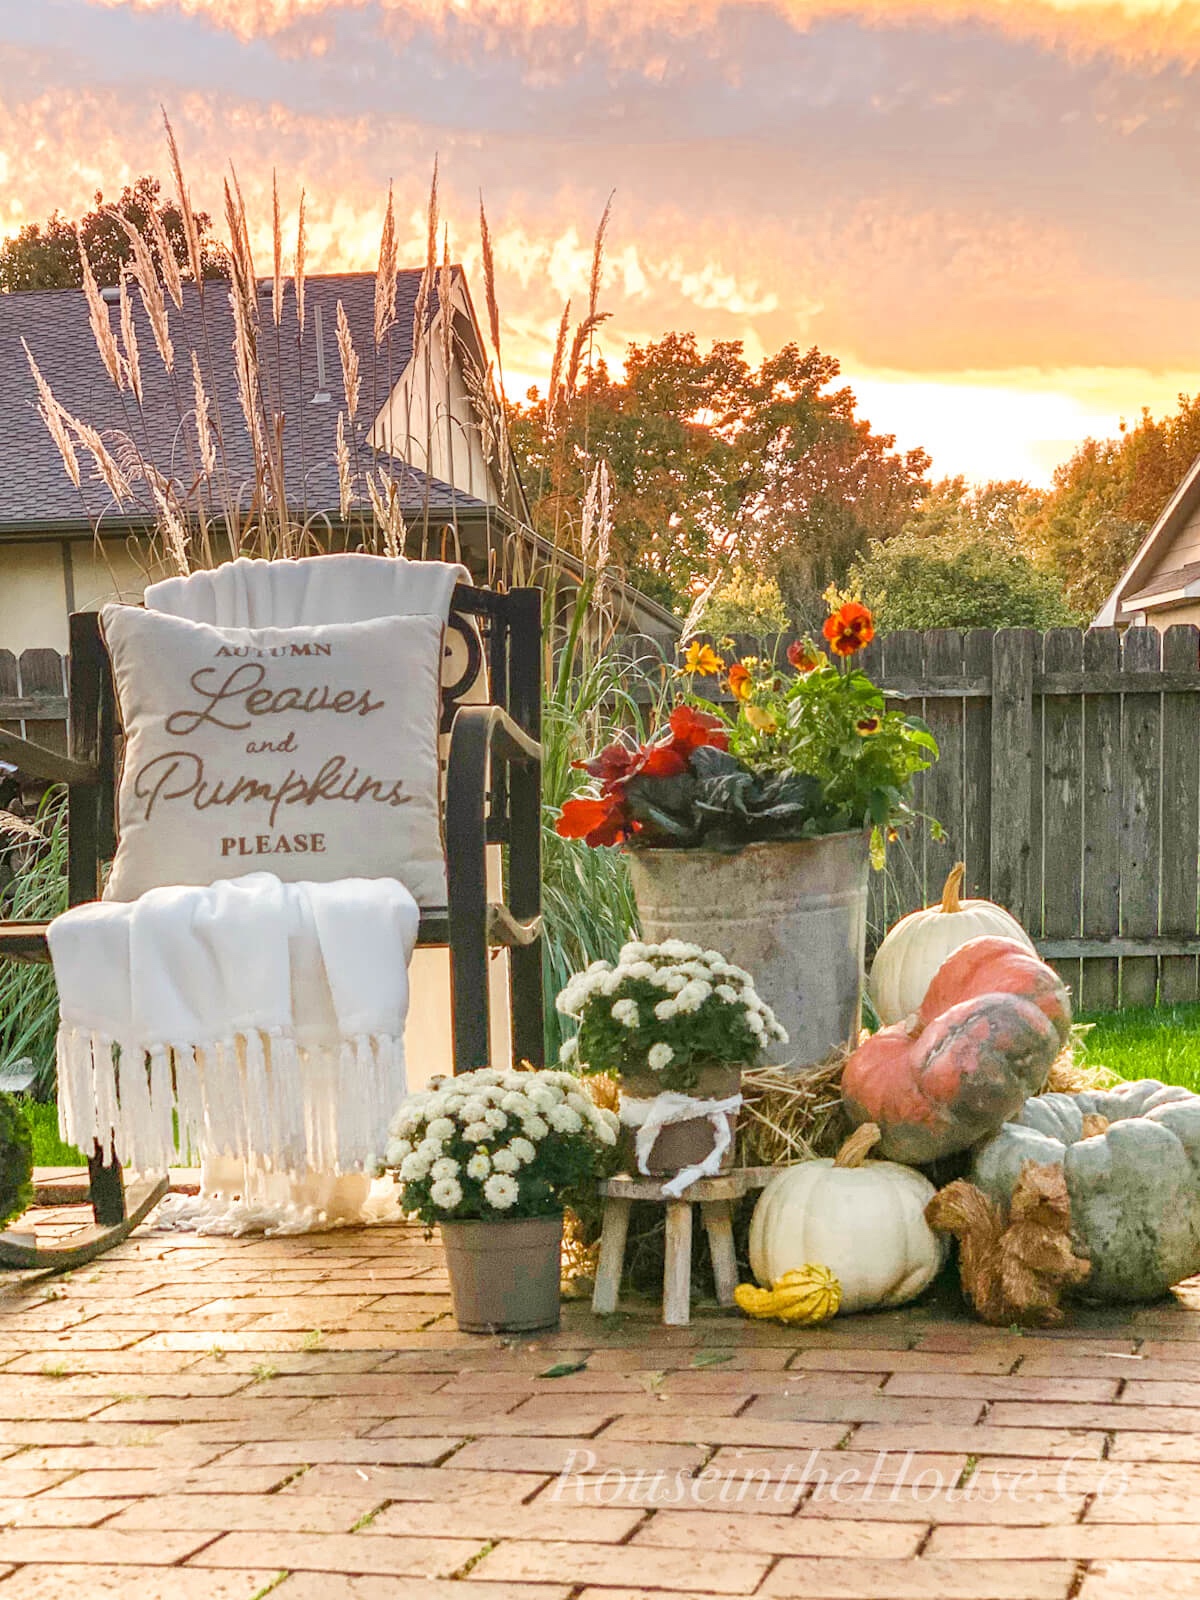 An outdoor fall display on a backyard patio: a square haybale creates a base for an outdoor fall vignette with gourds, pumpkins, small mums in pots and an outdoor fall container.  The outdoor display is next to a rocking chair with a pillow that reads, "Autumn Leaves and Pumpkins Please".